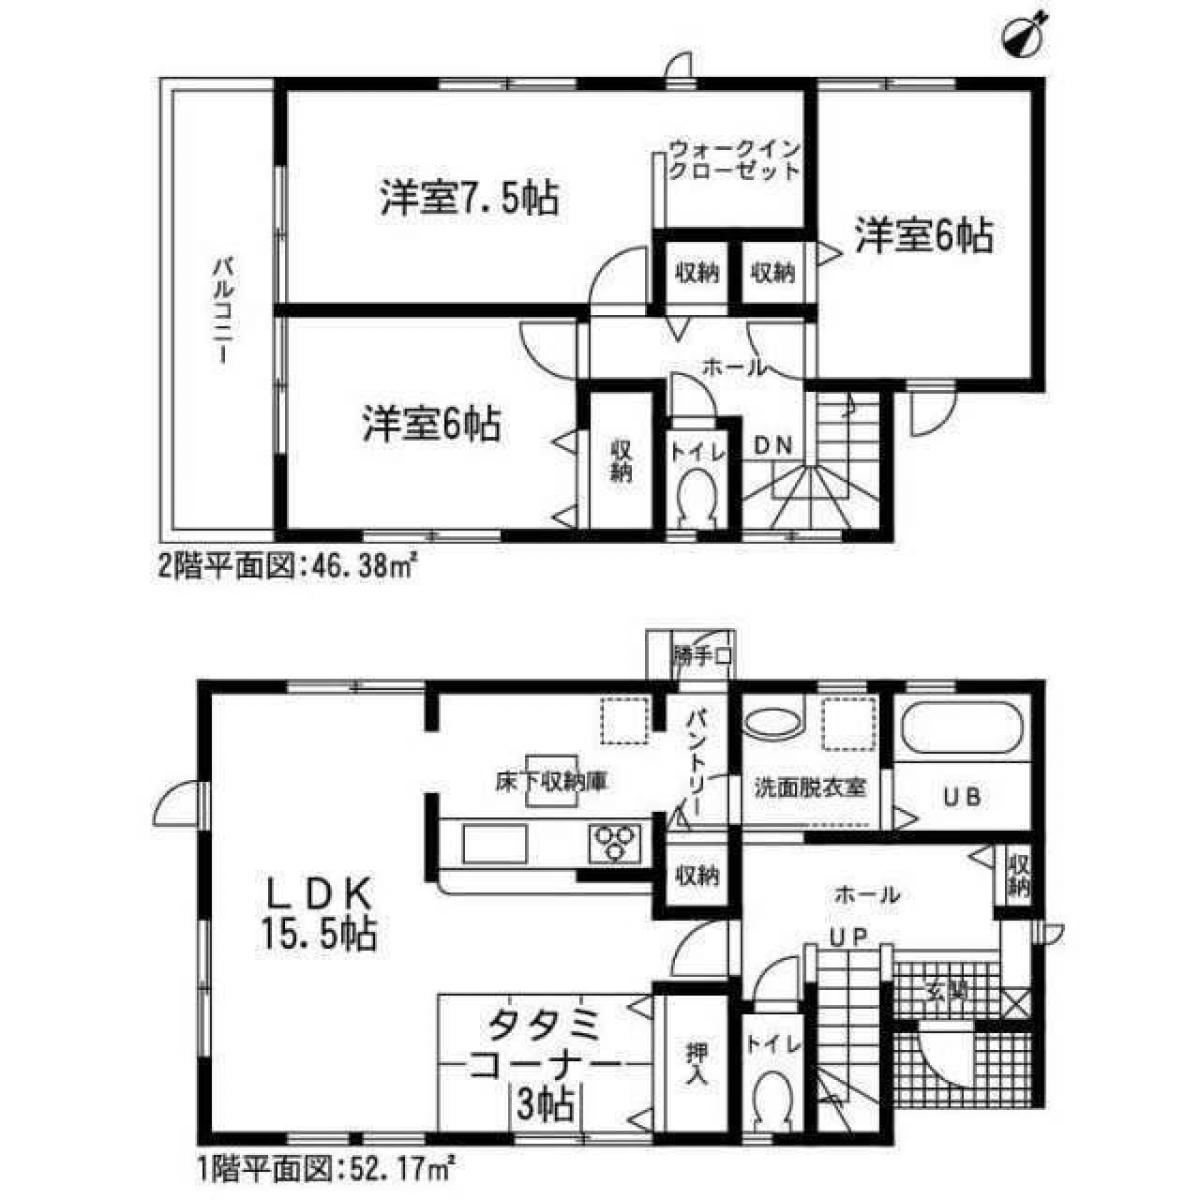 Picture of Home For Sale in Hekinan Shi, Aichi, Japan